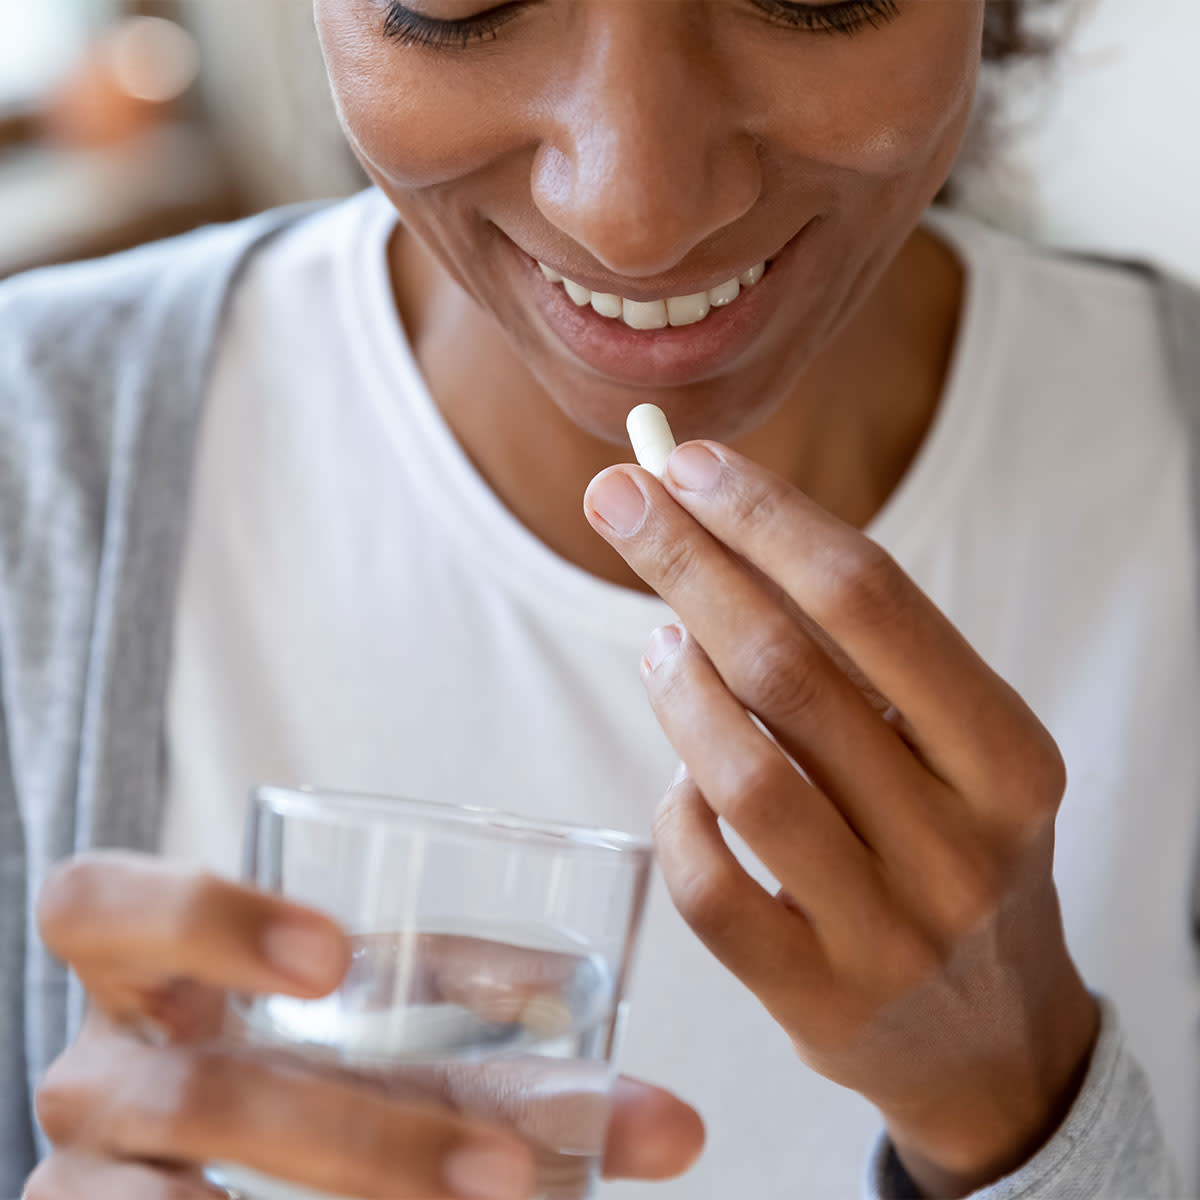 woman holding glass of water and taking probiotic supplement